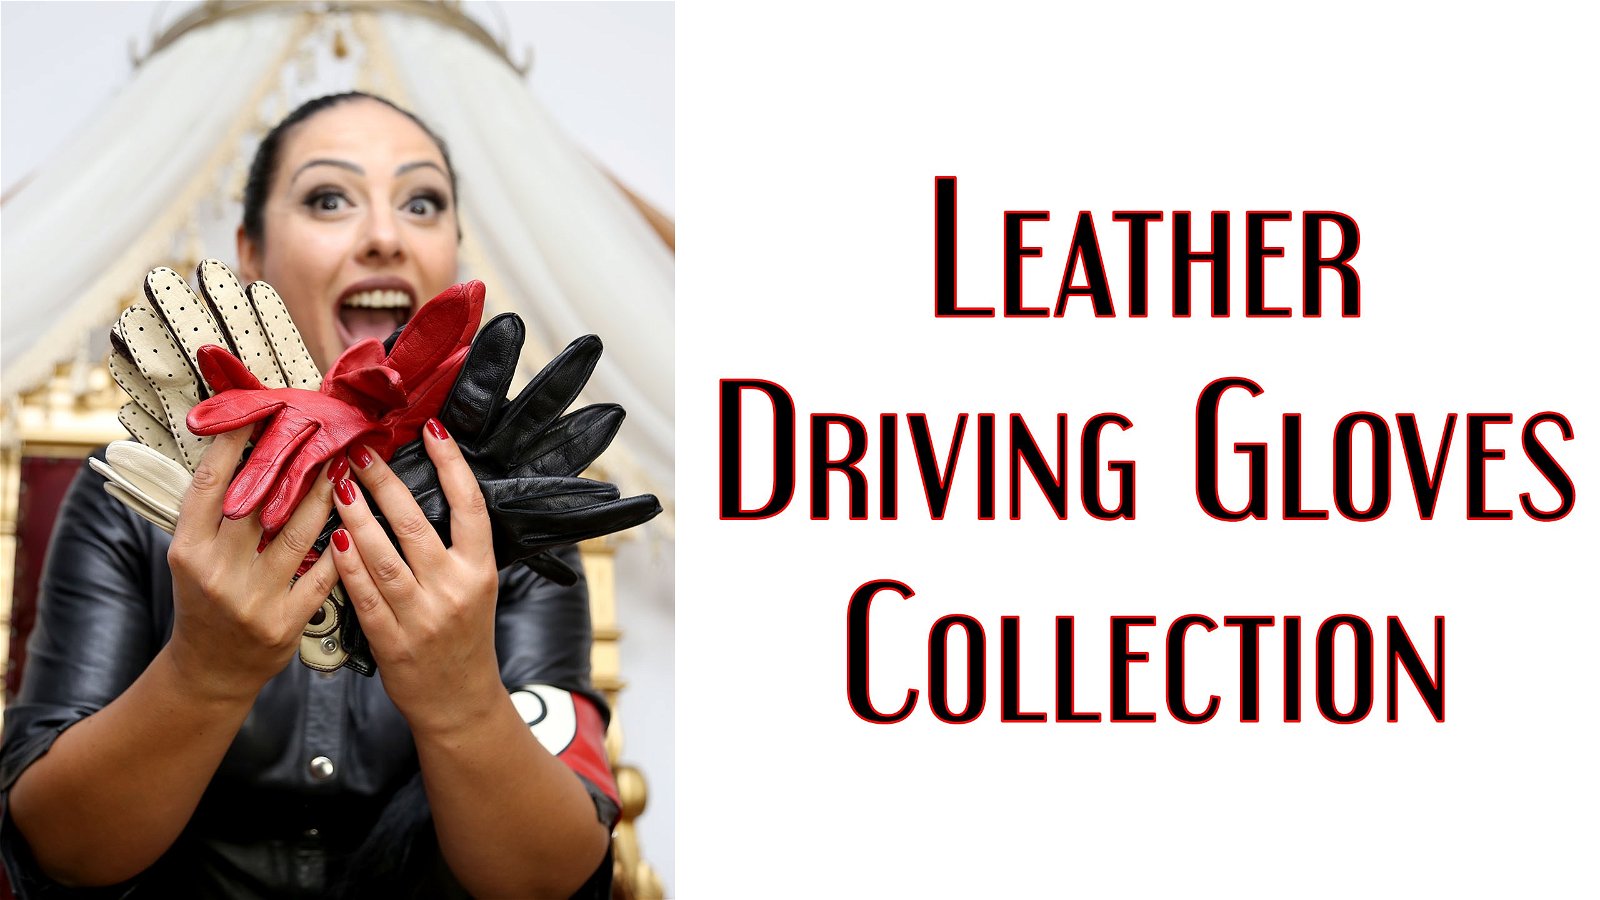 Photo by Ezada with the username @Ezada, who is a star user,  August 13, 2020 at 4:55 PM. The post is about the topic Leather fetish and the text says 'This is My collection of leather driving gloves: https://youtu.be/uEq6eYzSMdE'